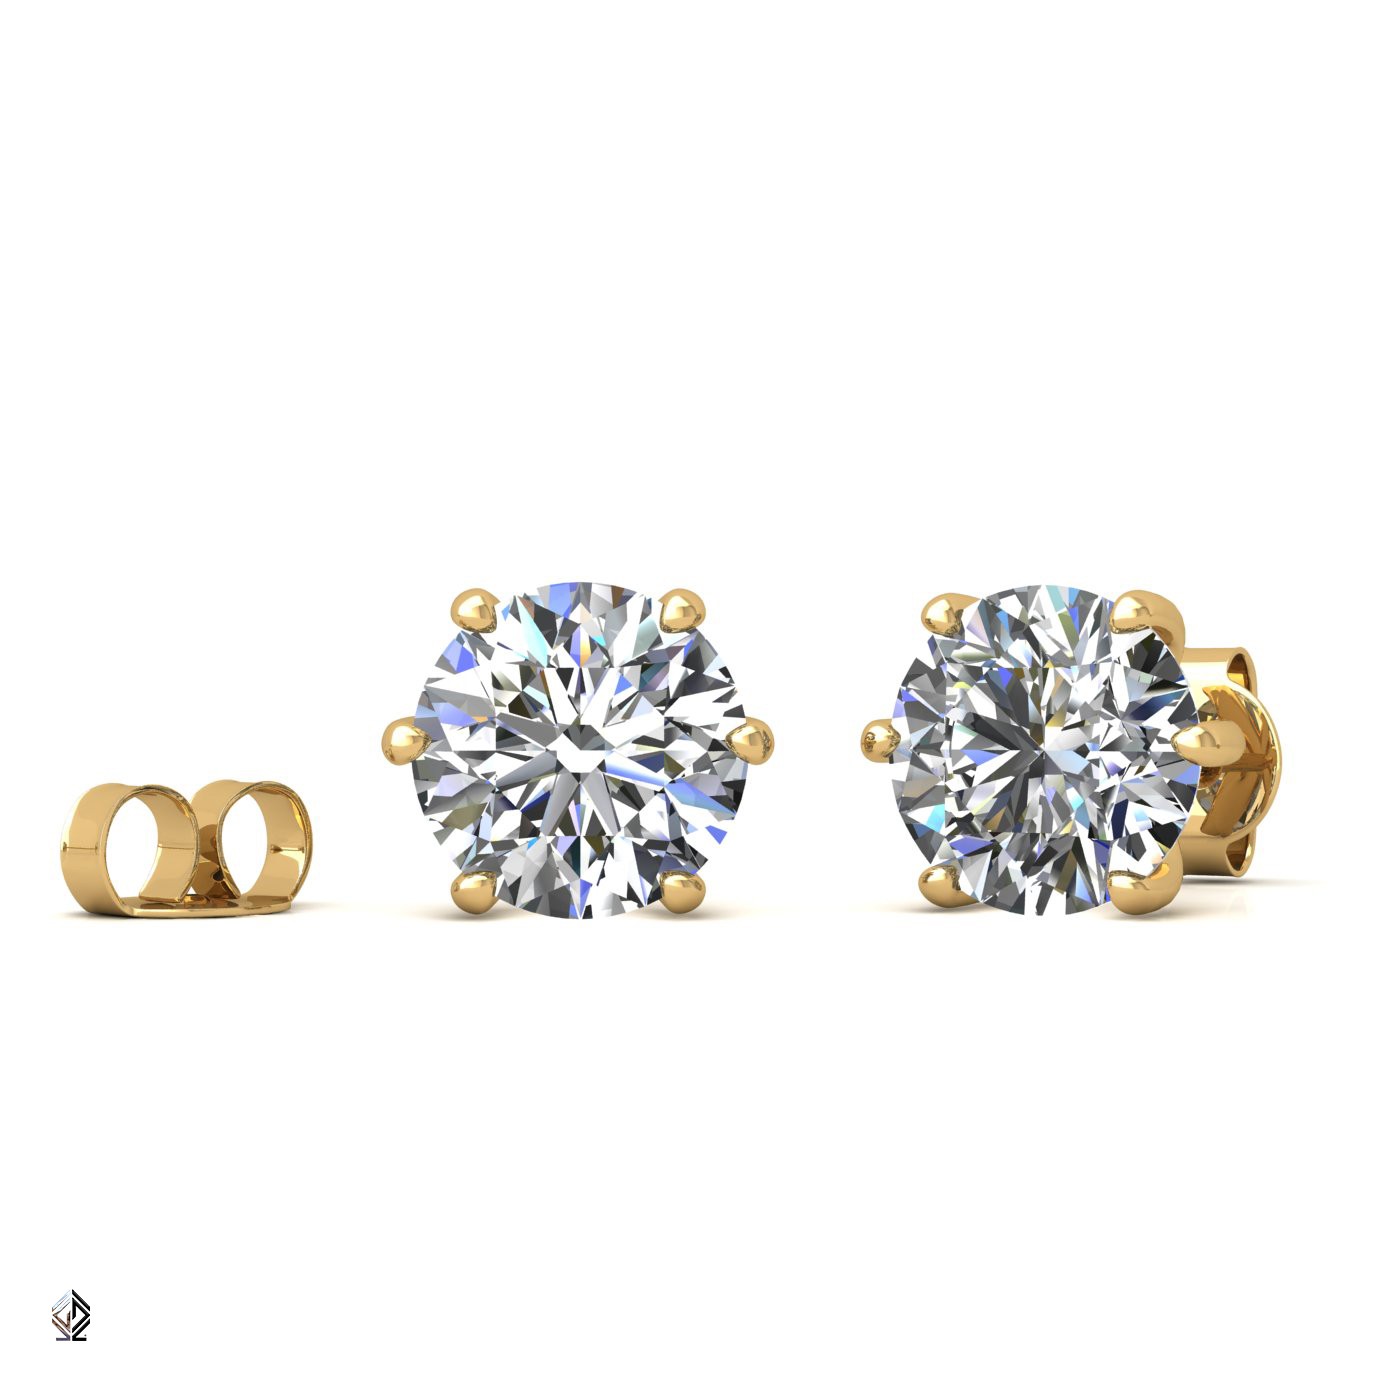 18k yellow gold 0,5 ct each (1,0 tcw) 6 prongs round shape diamond earrings Photos & images